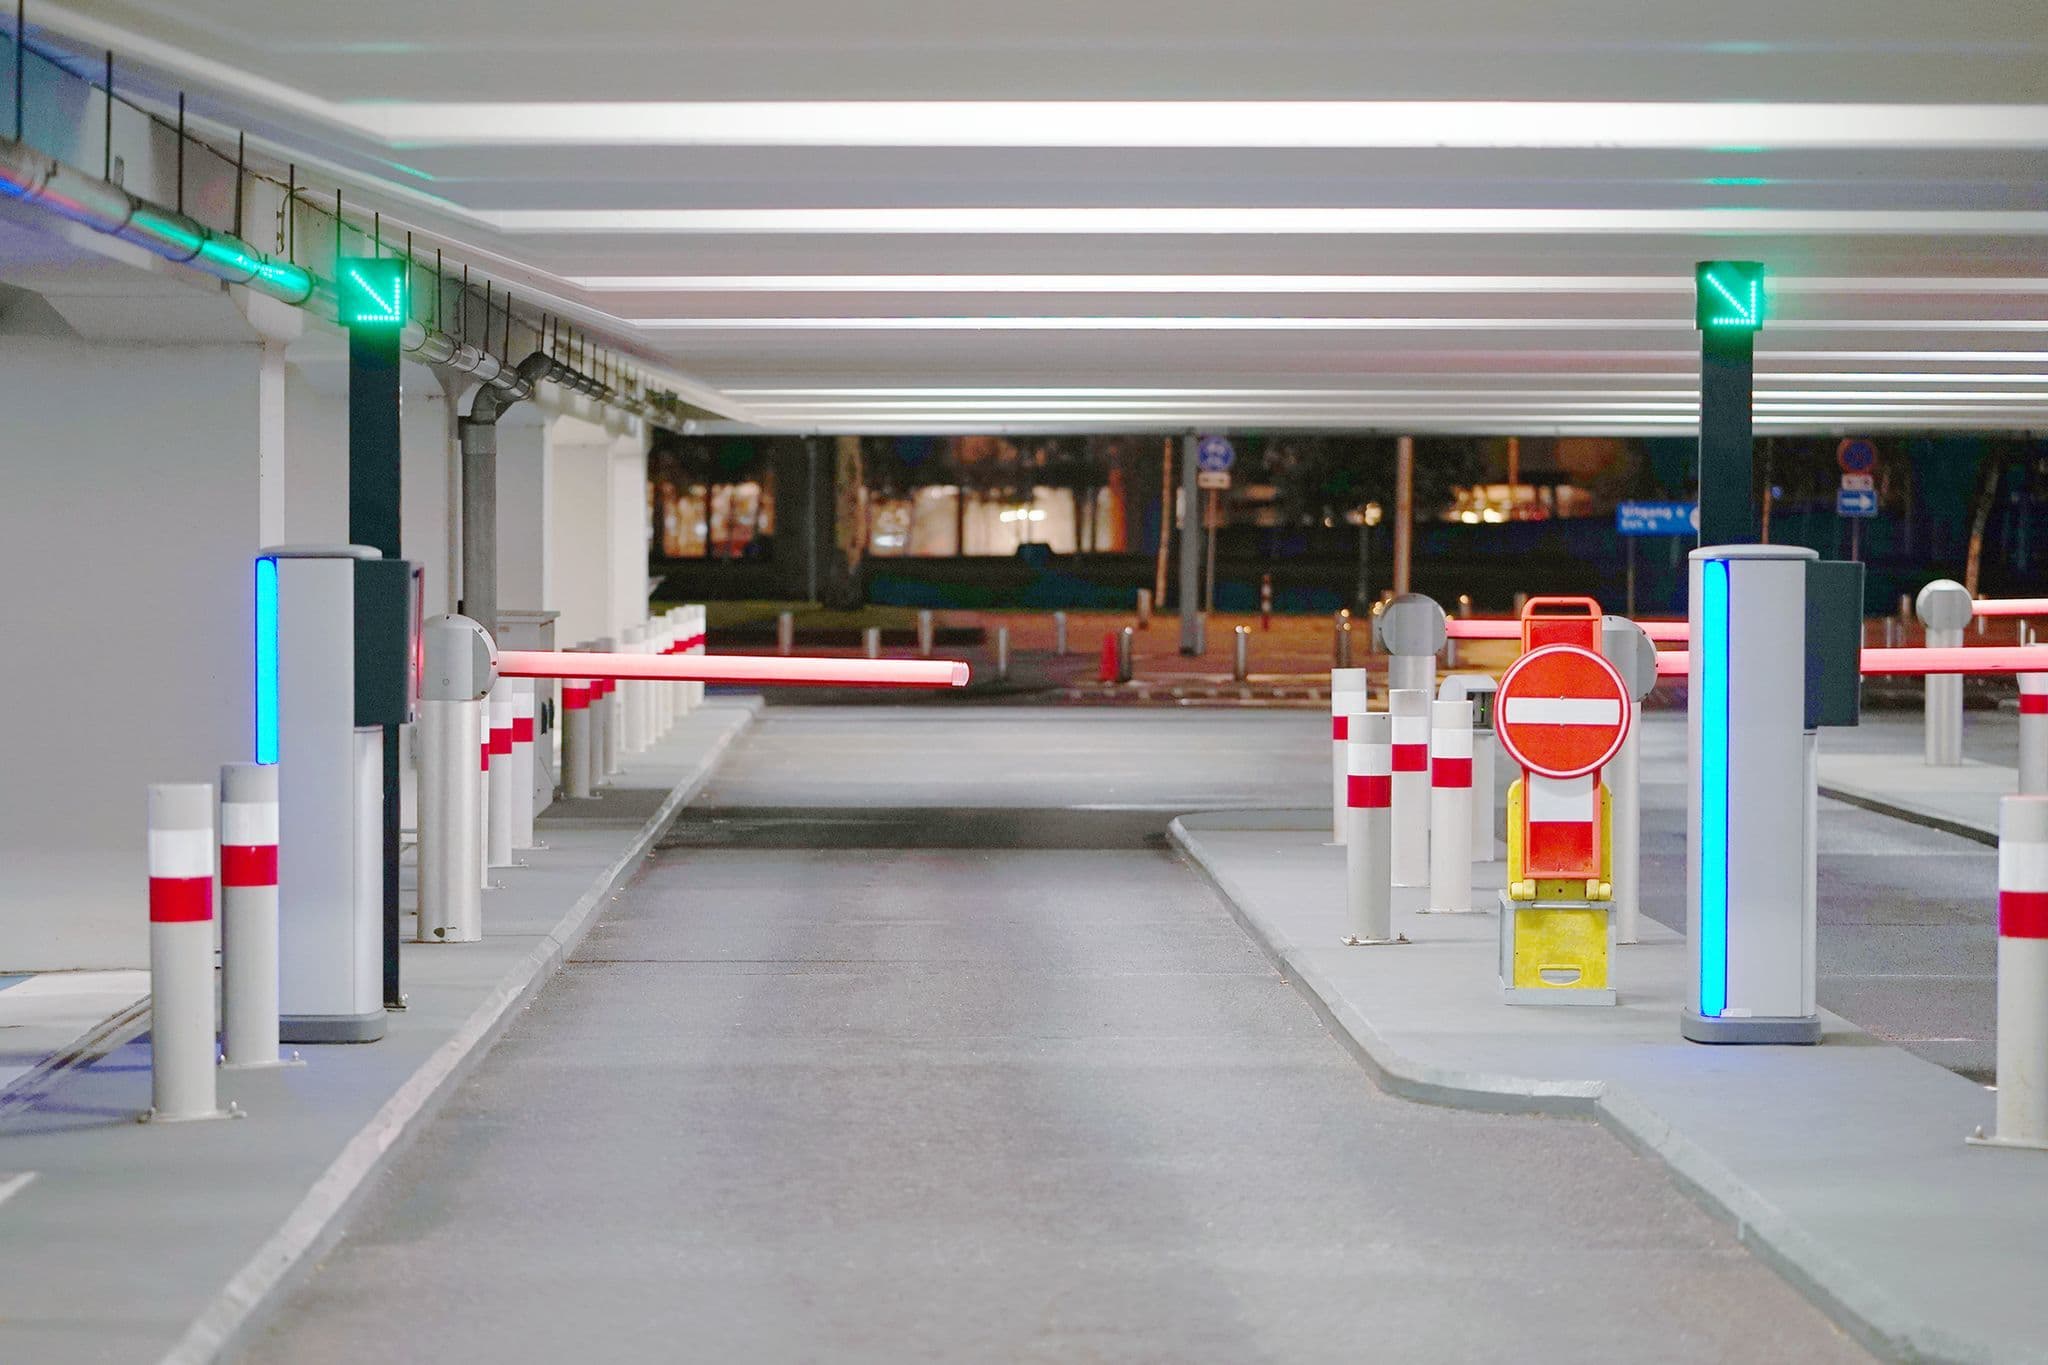 school underground parking lot with barrier arm and gate entry system